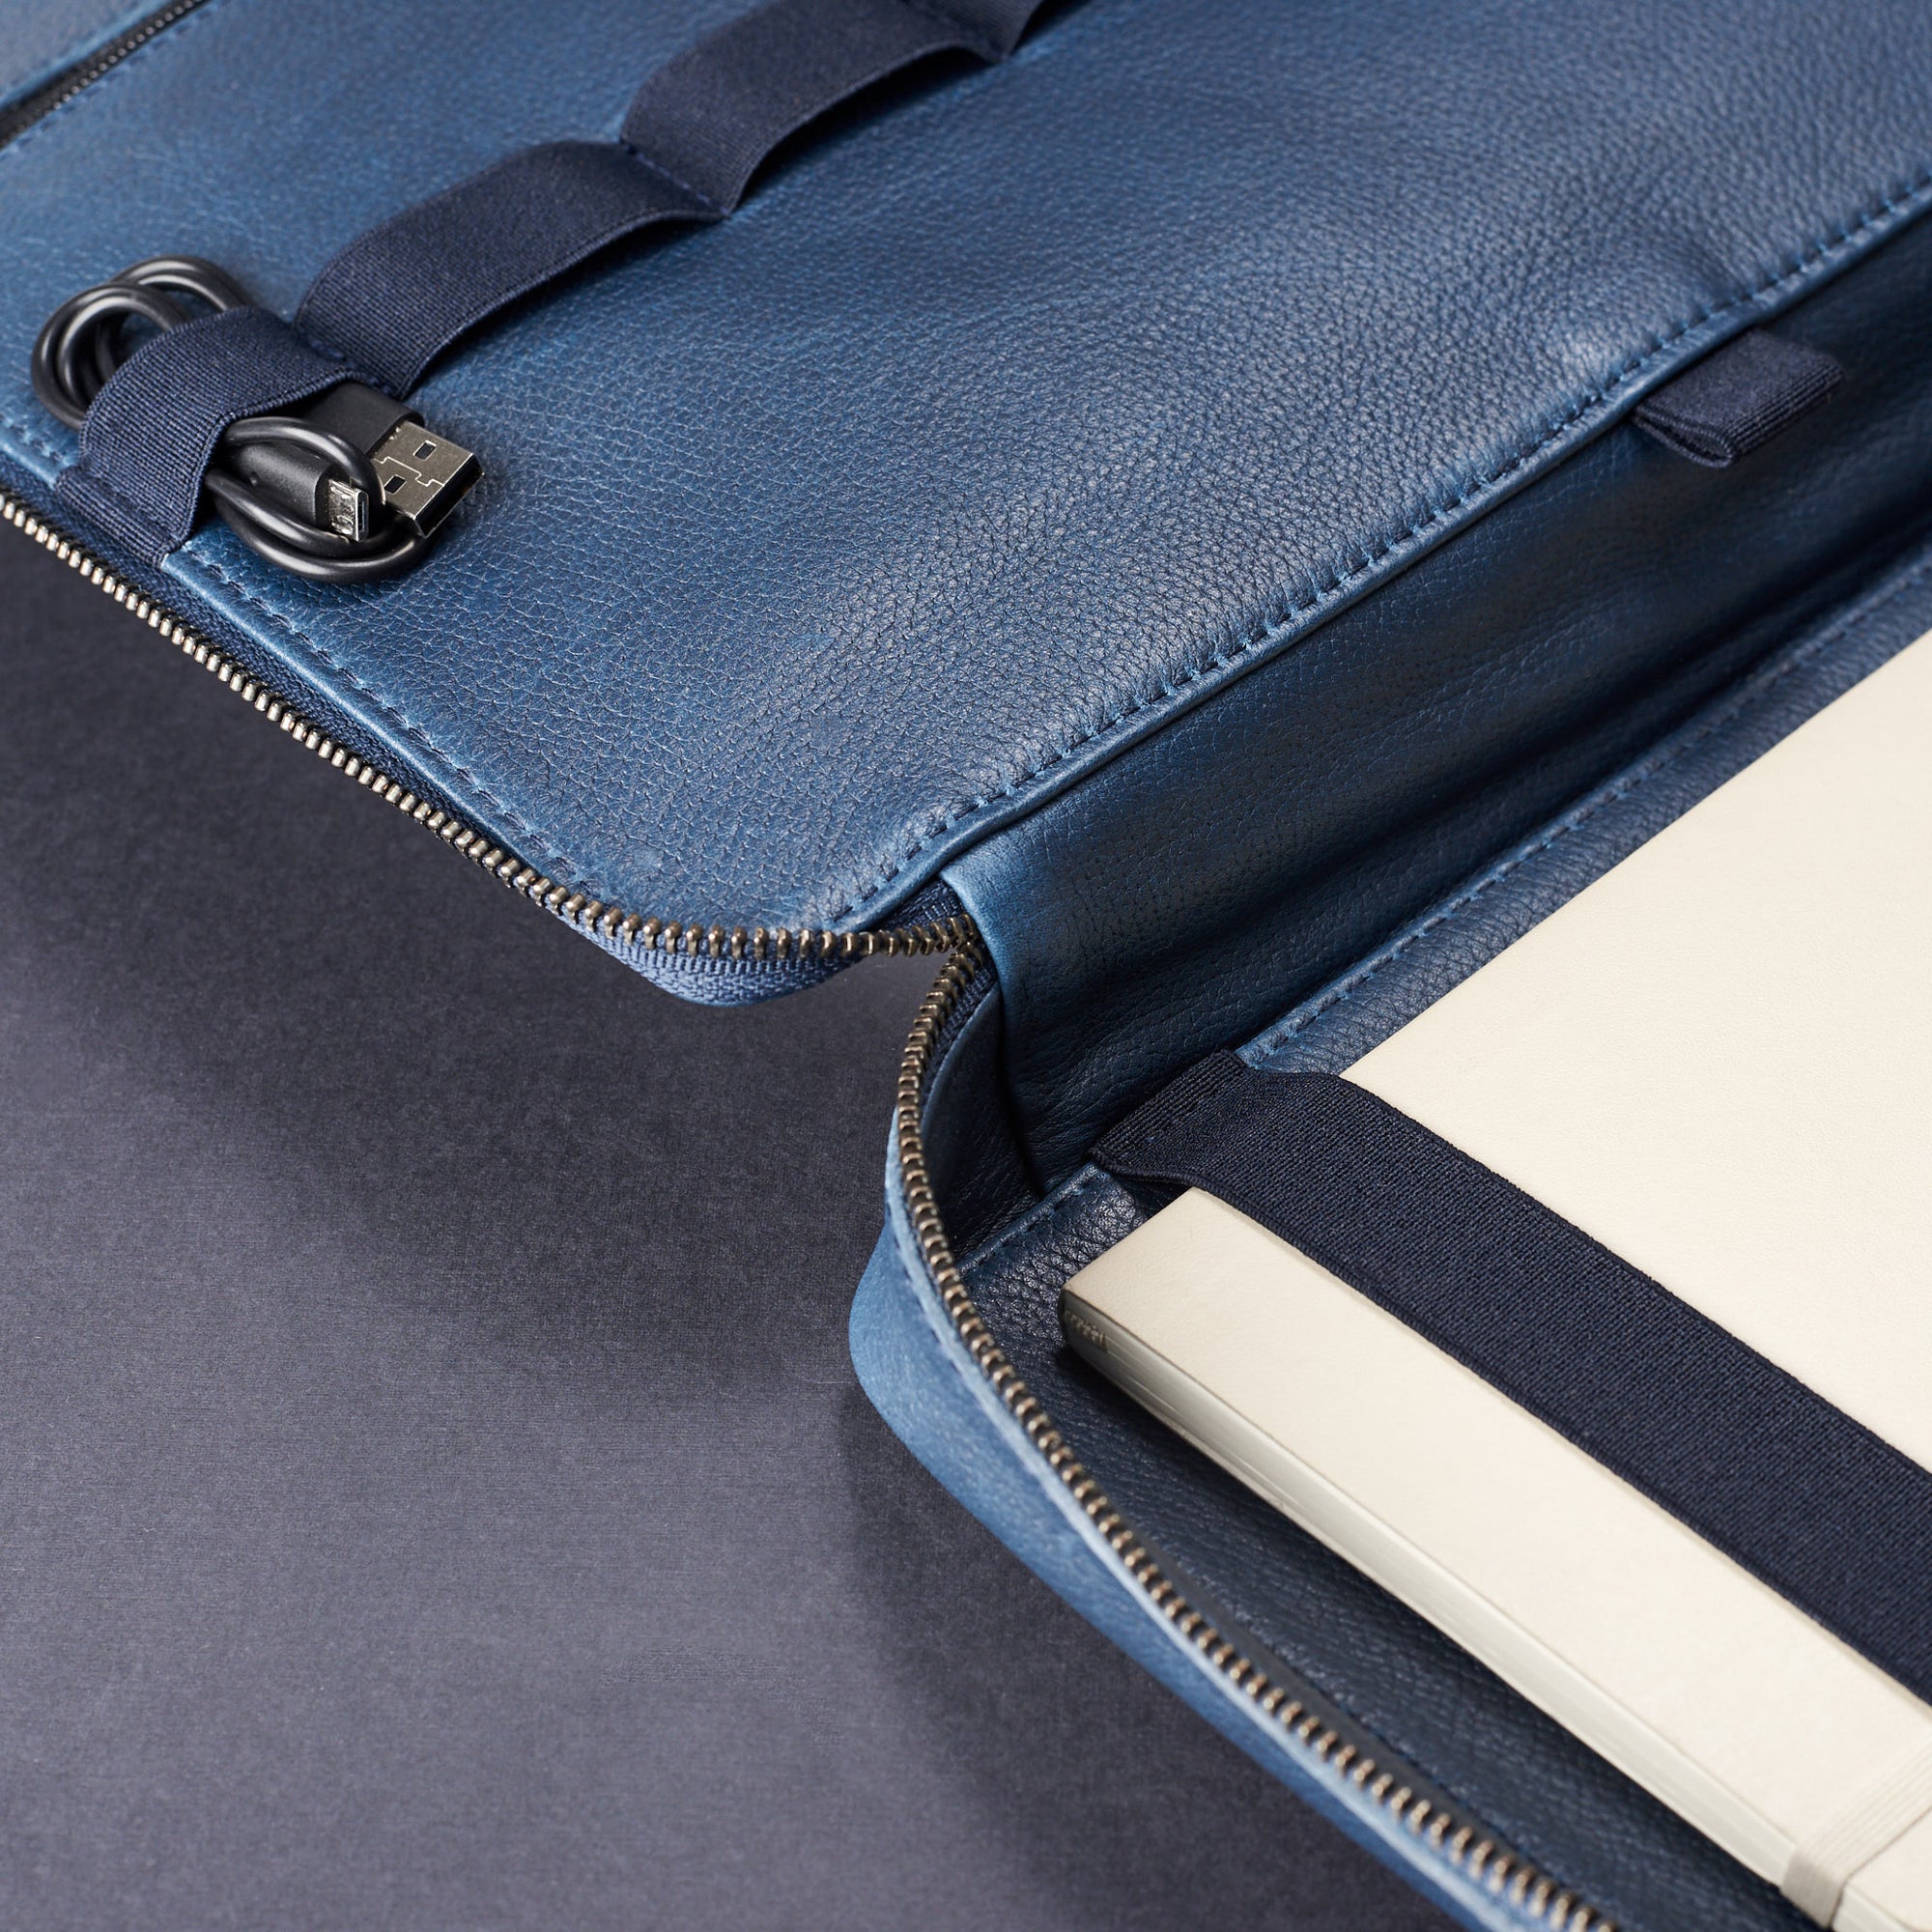 Leather interior and elastic slots. Navy blue gadget bag for travel by Capra Leather